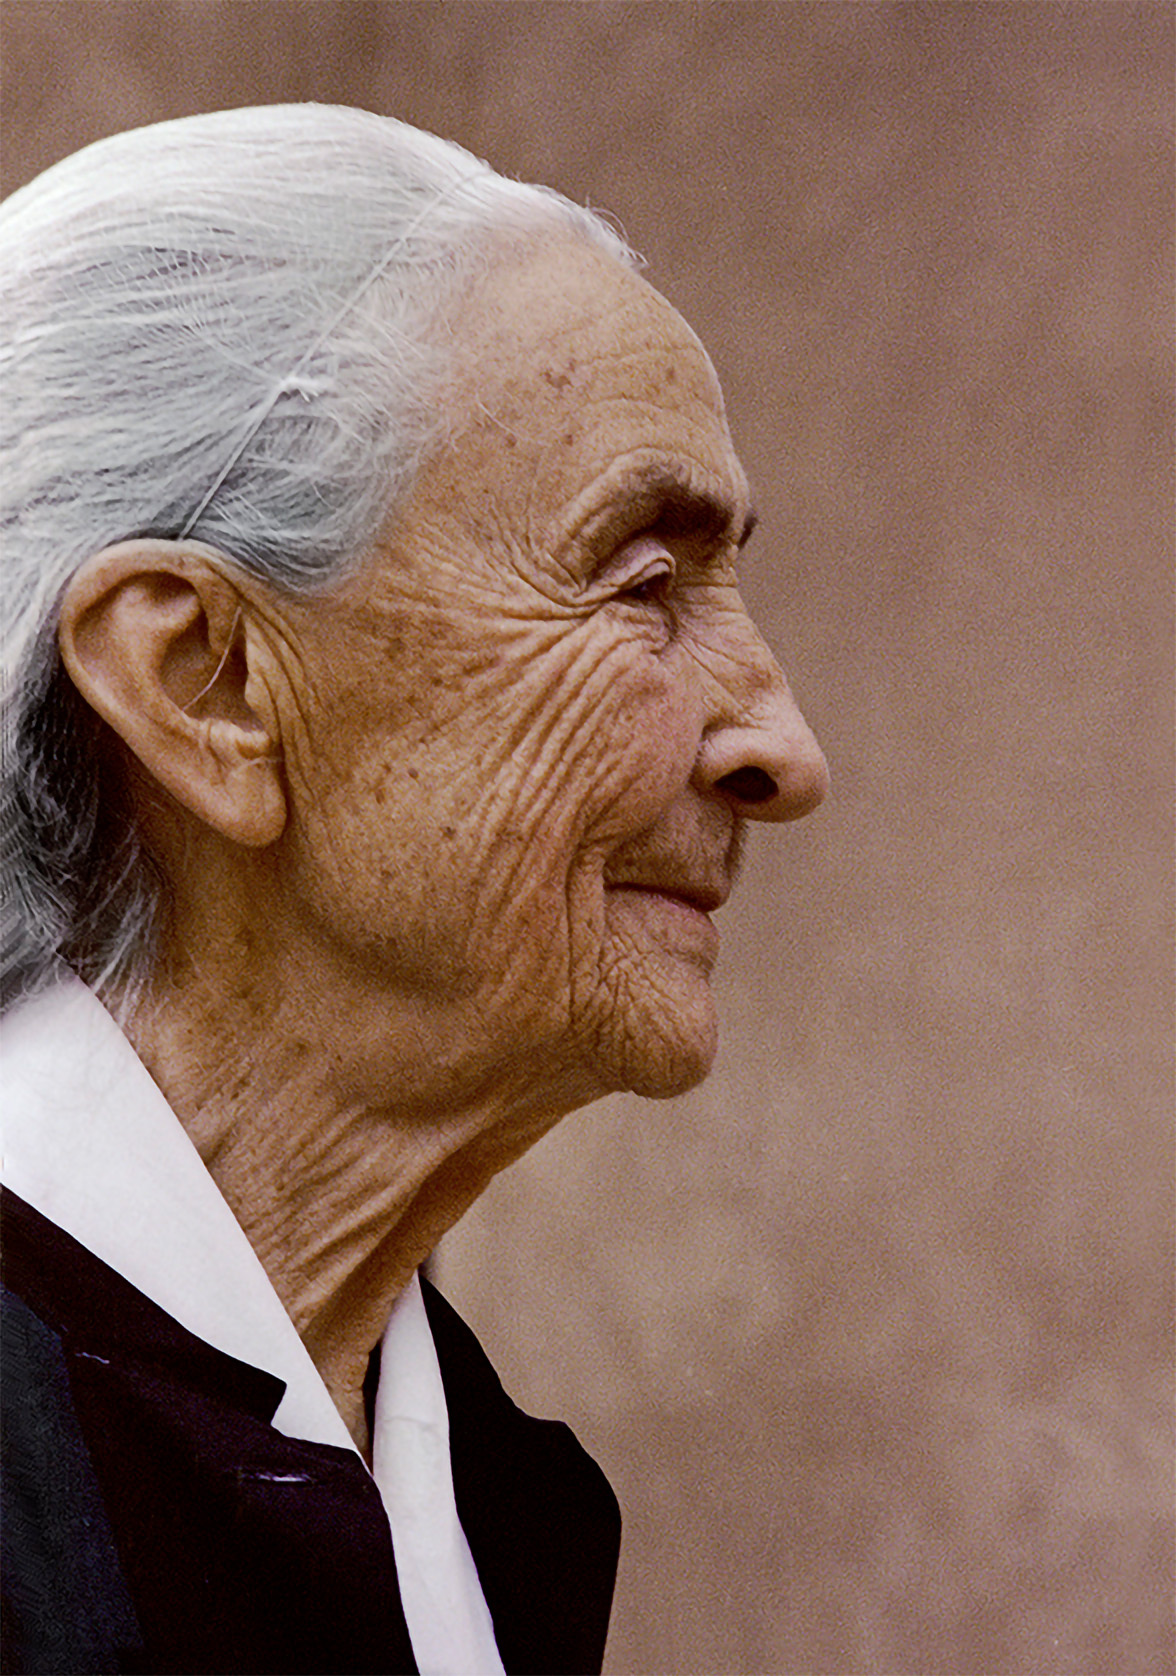 Photograph of a women in profile with white gray hair in a subtle matching hair net. Her skin is peachy-tan and worn with wrikles. She is slightly smiling. The woman wears a black jacket or shirt with a white collar and stands against a tan-colored stucco wall.